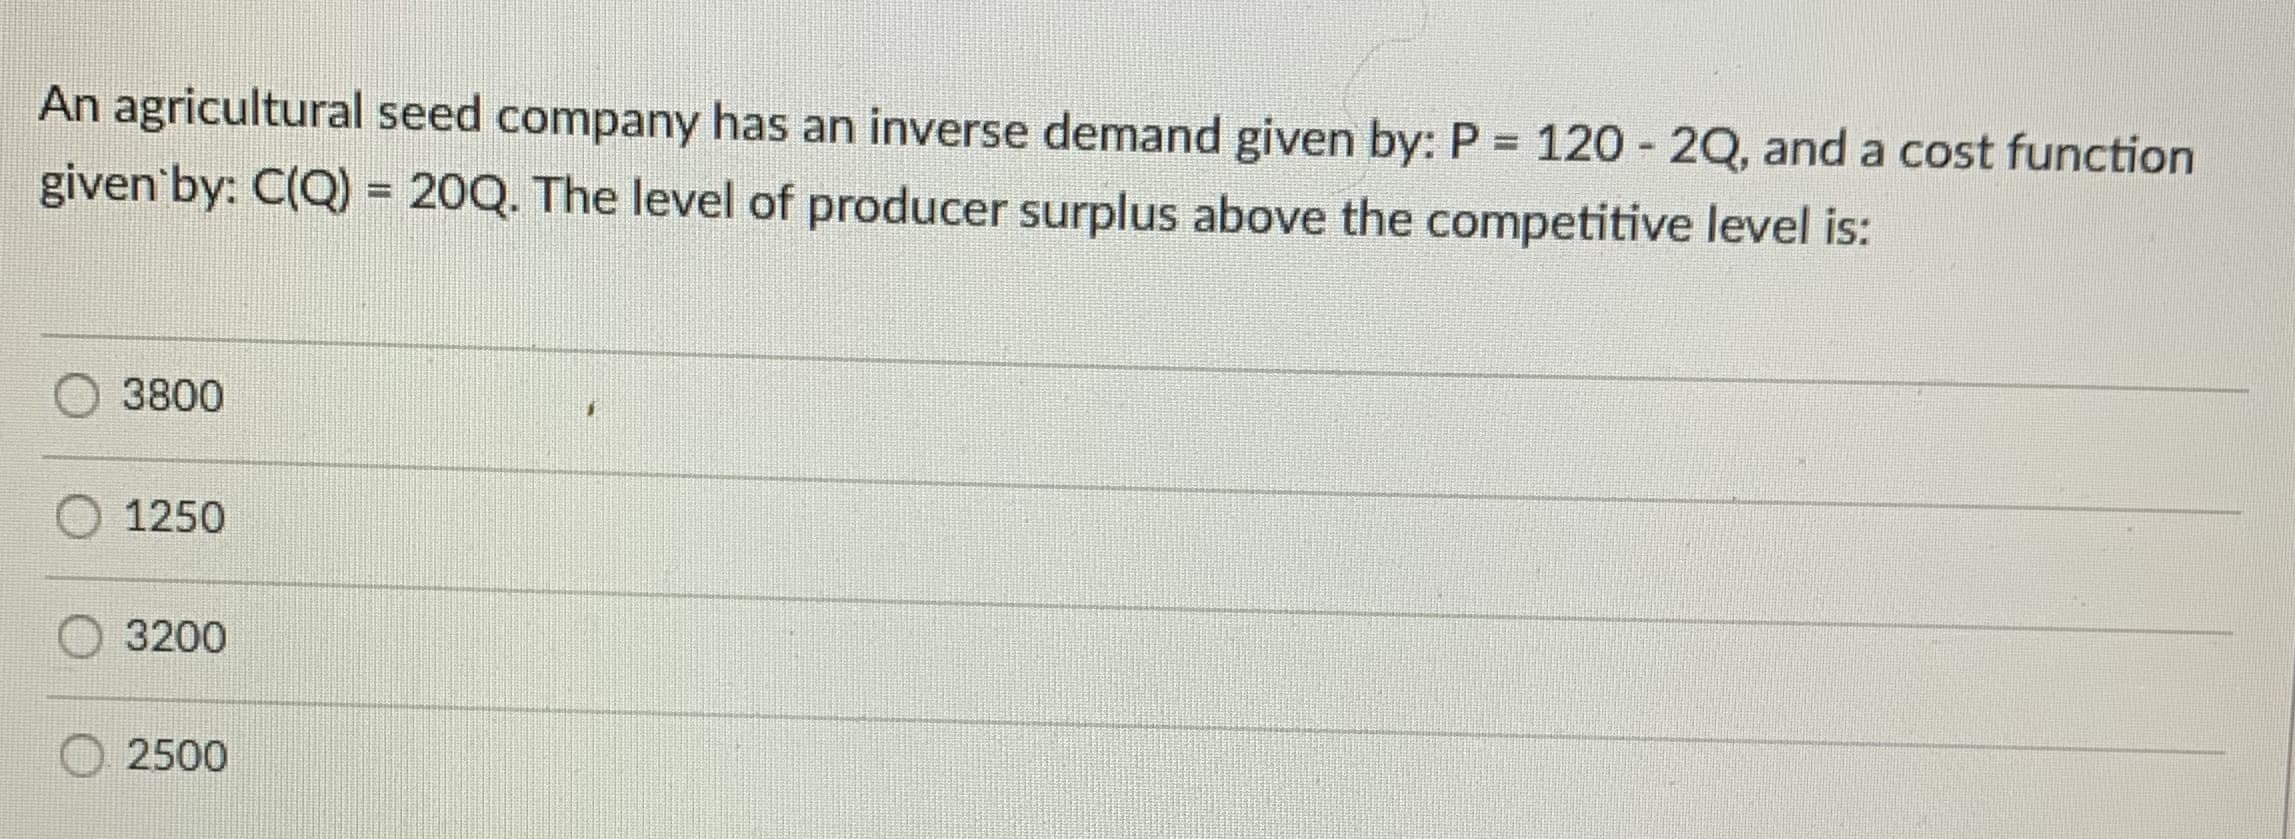 An agricultural seed company has an inverse demand given by: P 120 - 2Q, and a cost function
given'by: C(Q) = 20Q. The level of producer surplus above the competitive level is:
